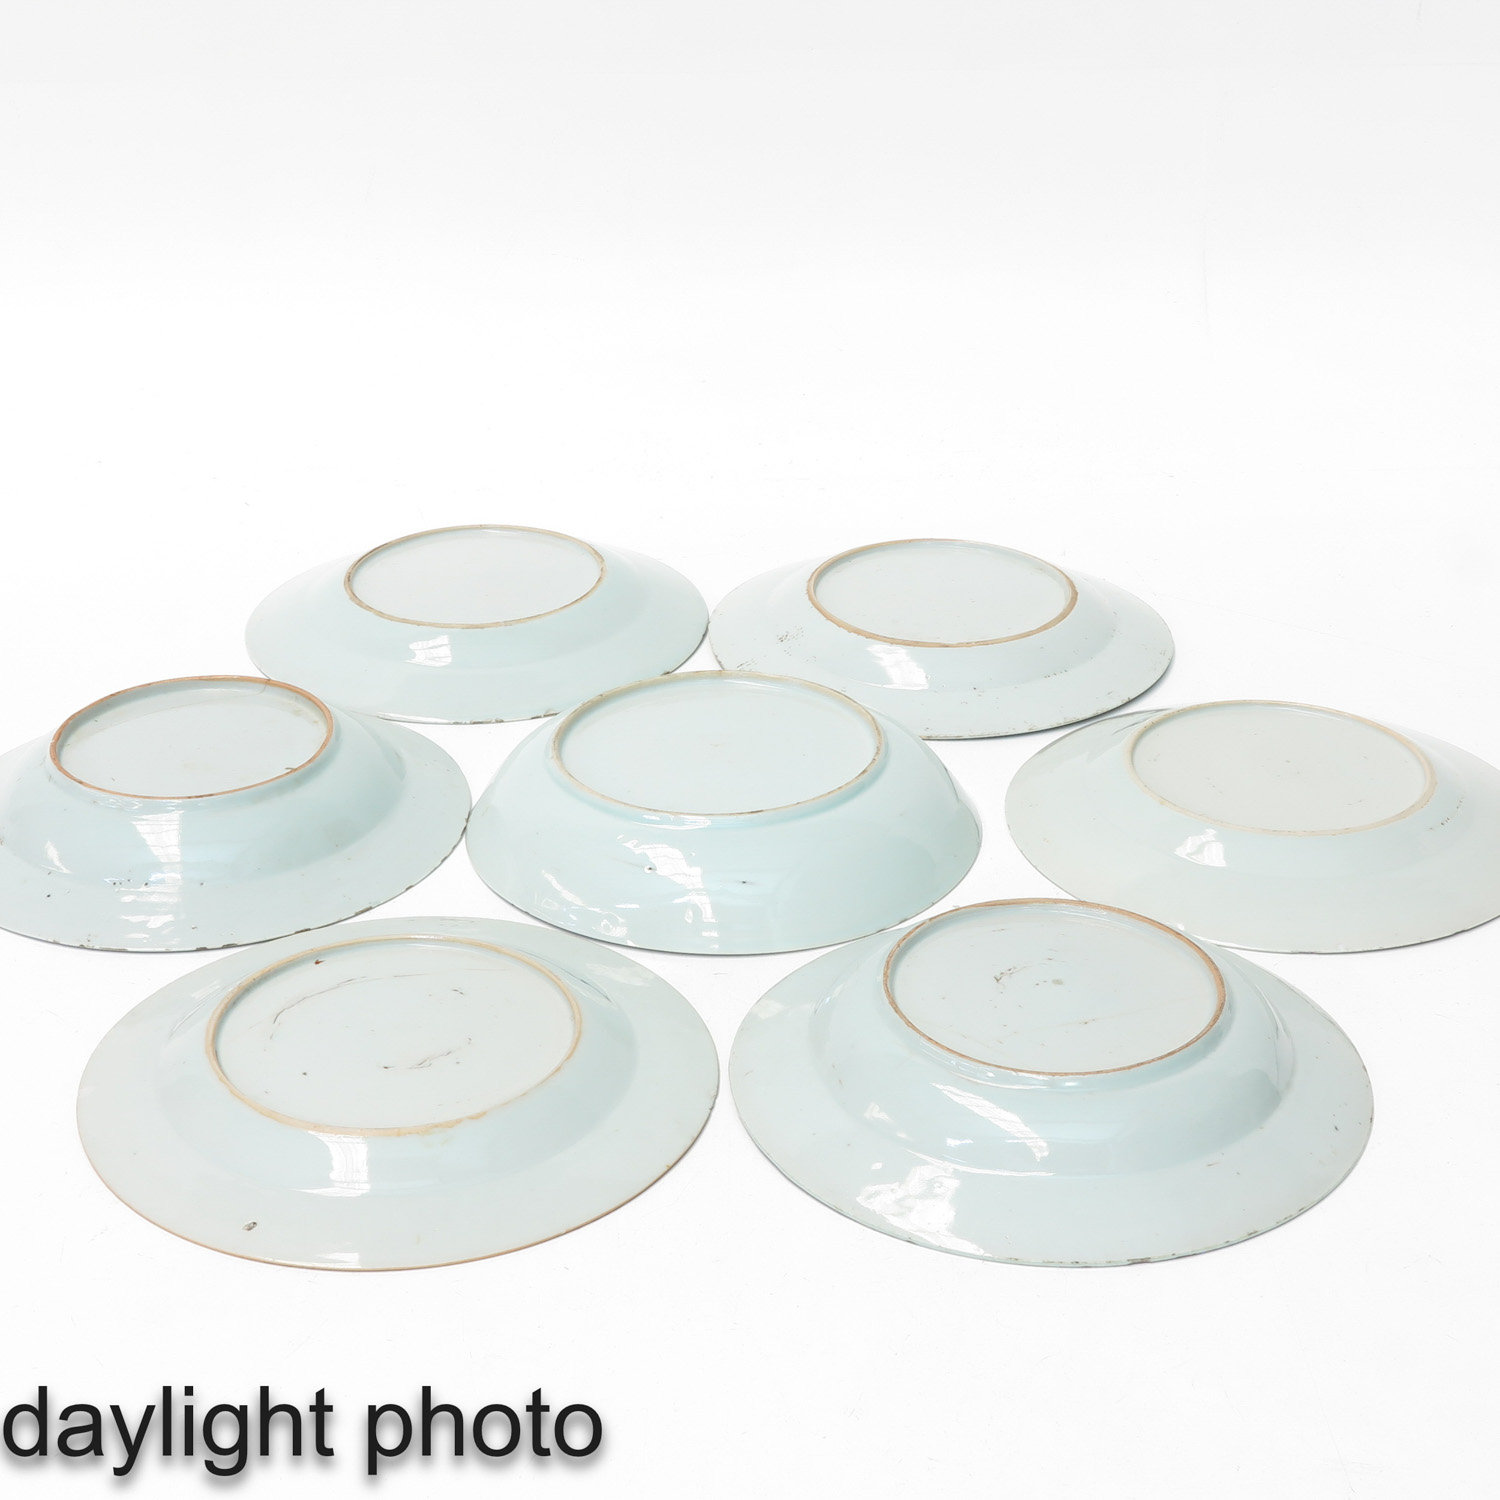 A Collection of 7 Blue and White Plates - Image 10 of 10